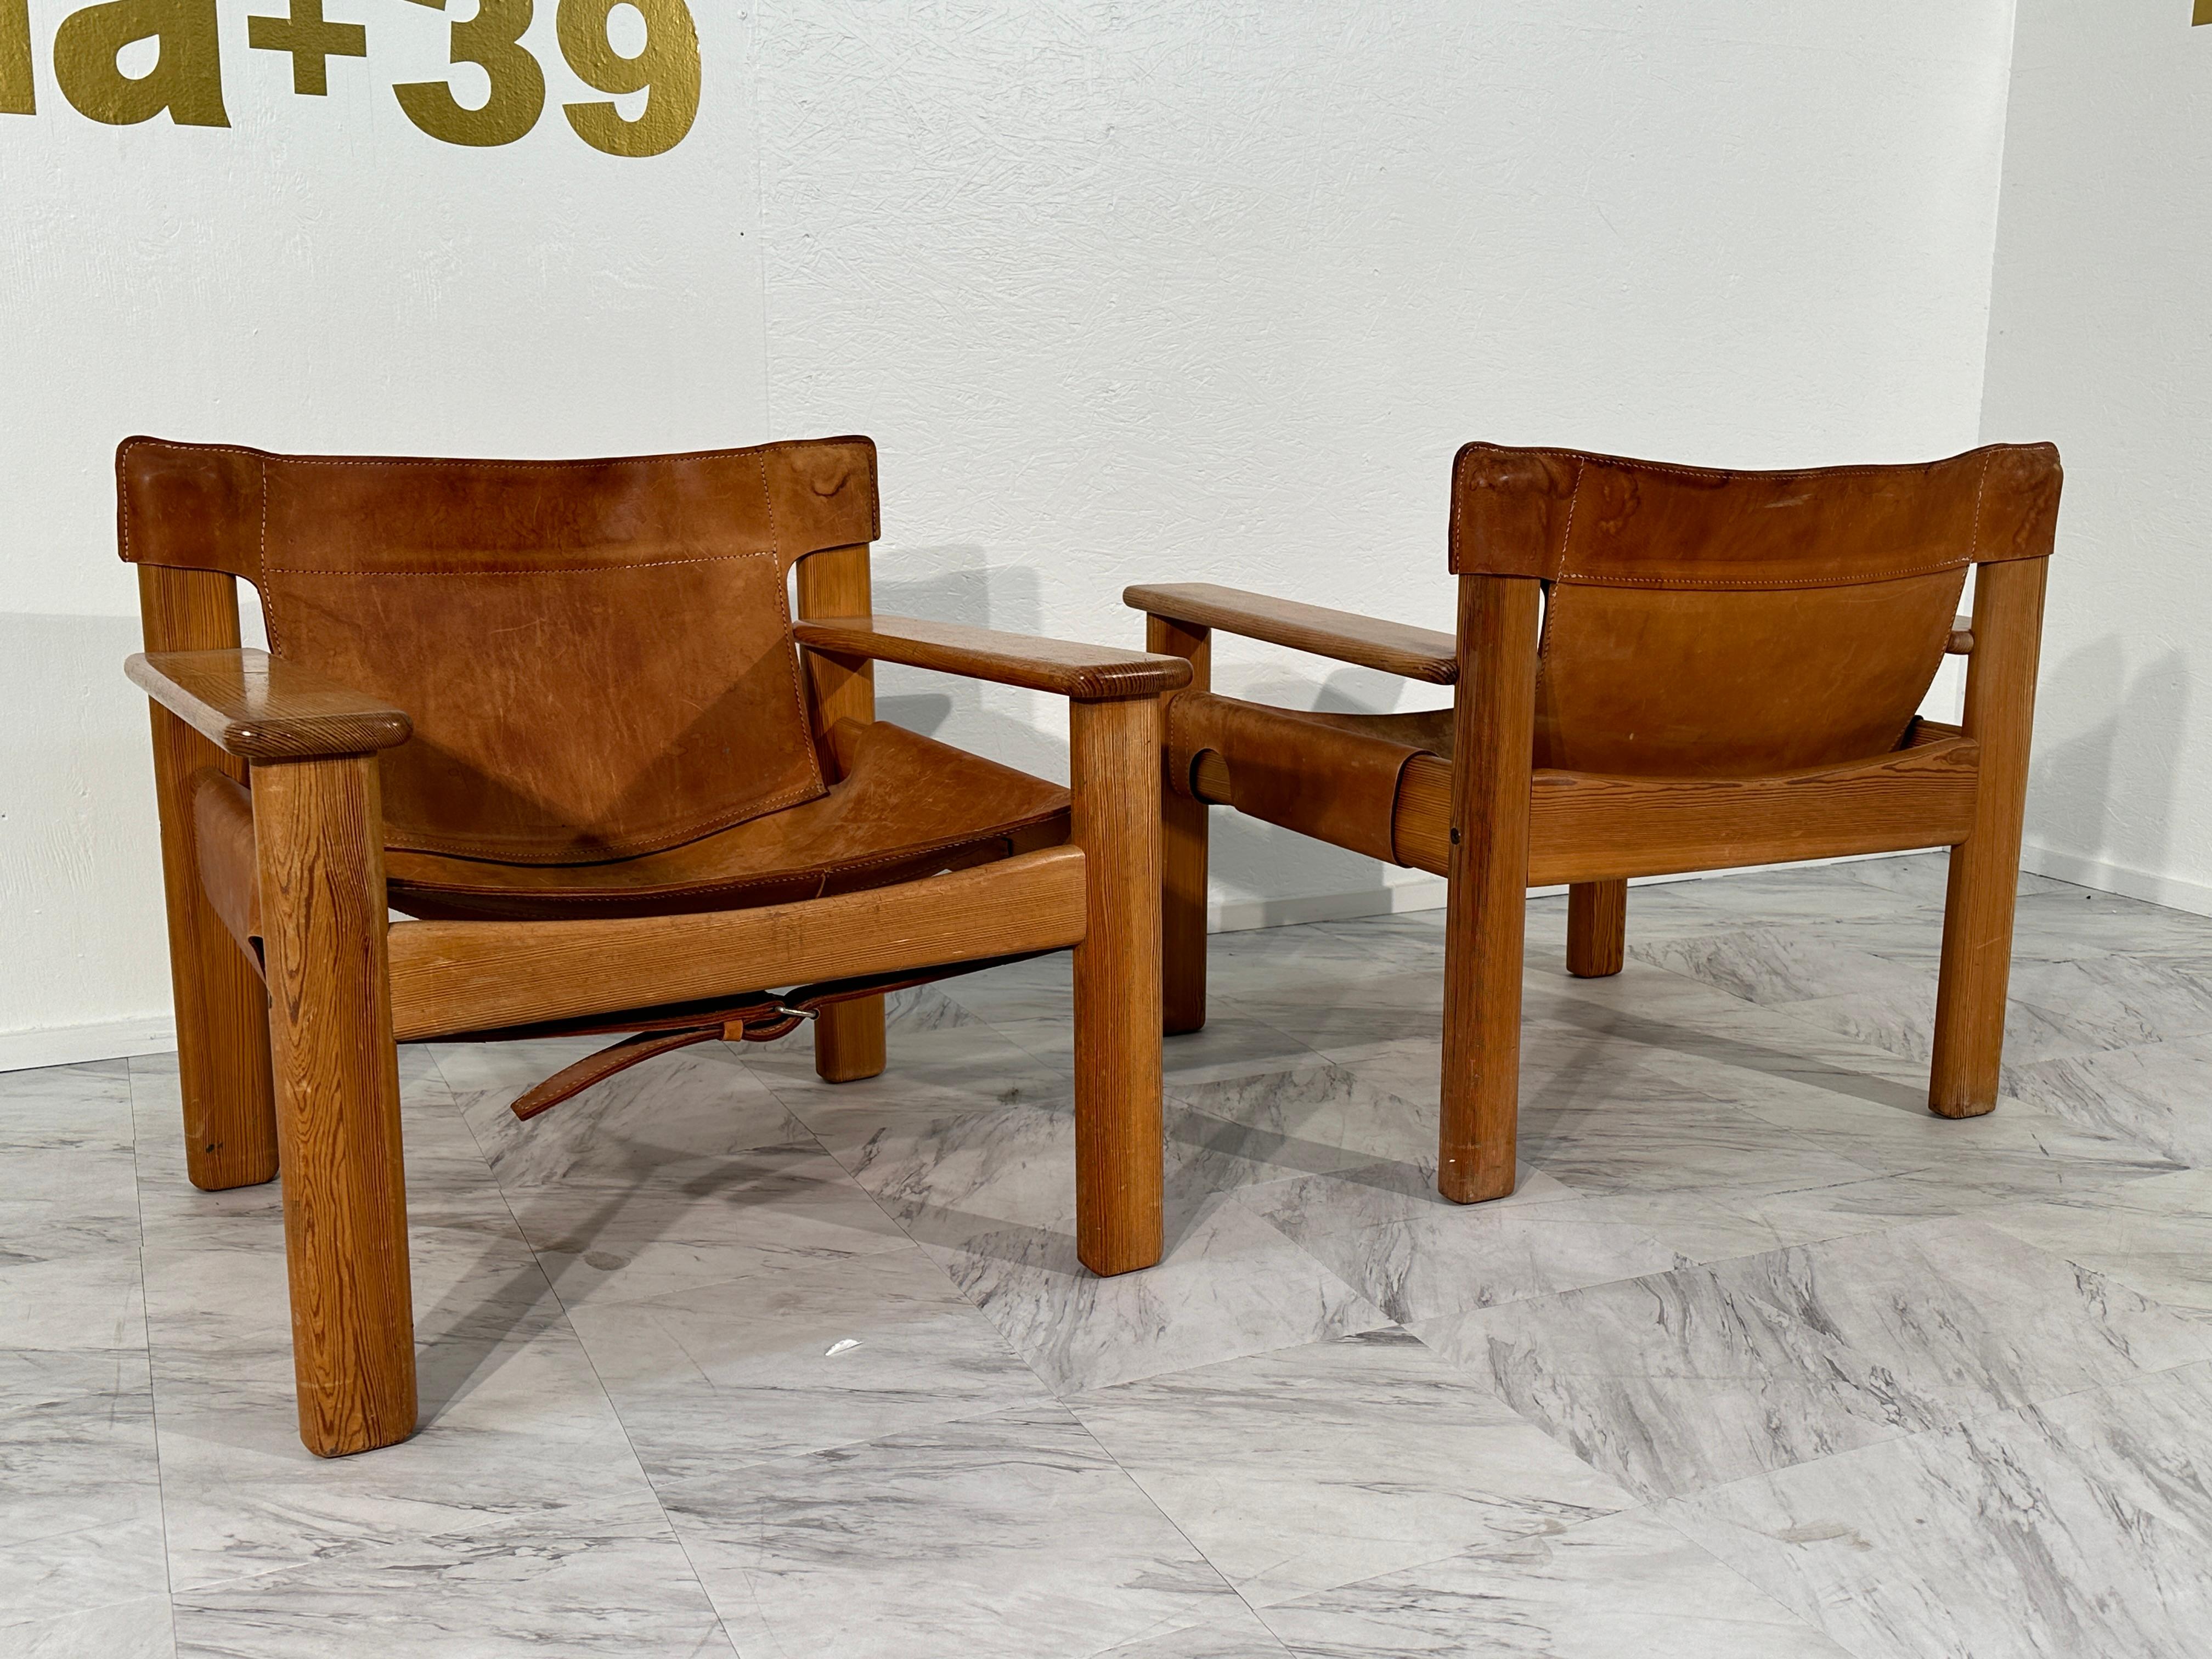 The Set of 2 Vintage Italian Wood and Leather Safari Chairs from the 1970s epitomizes the adventurous spirit of safari expeditions while exuding timeless elegance. Crafted in Italy during the 1970s, these chairs feature sturdy wooden frames